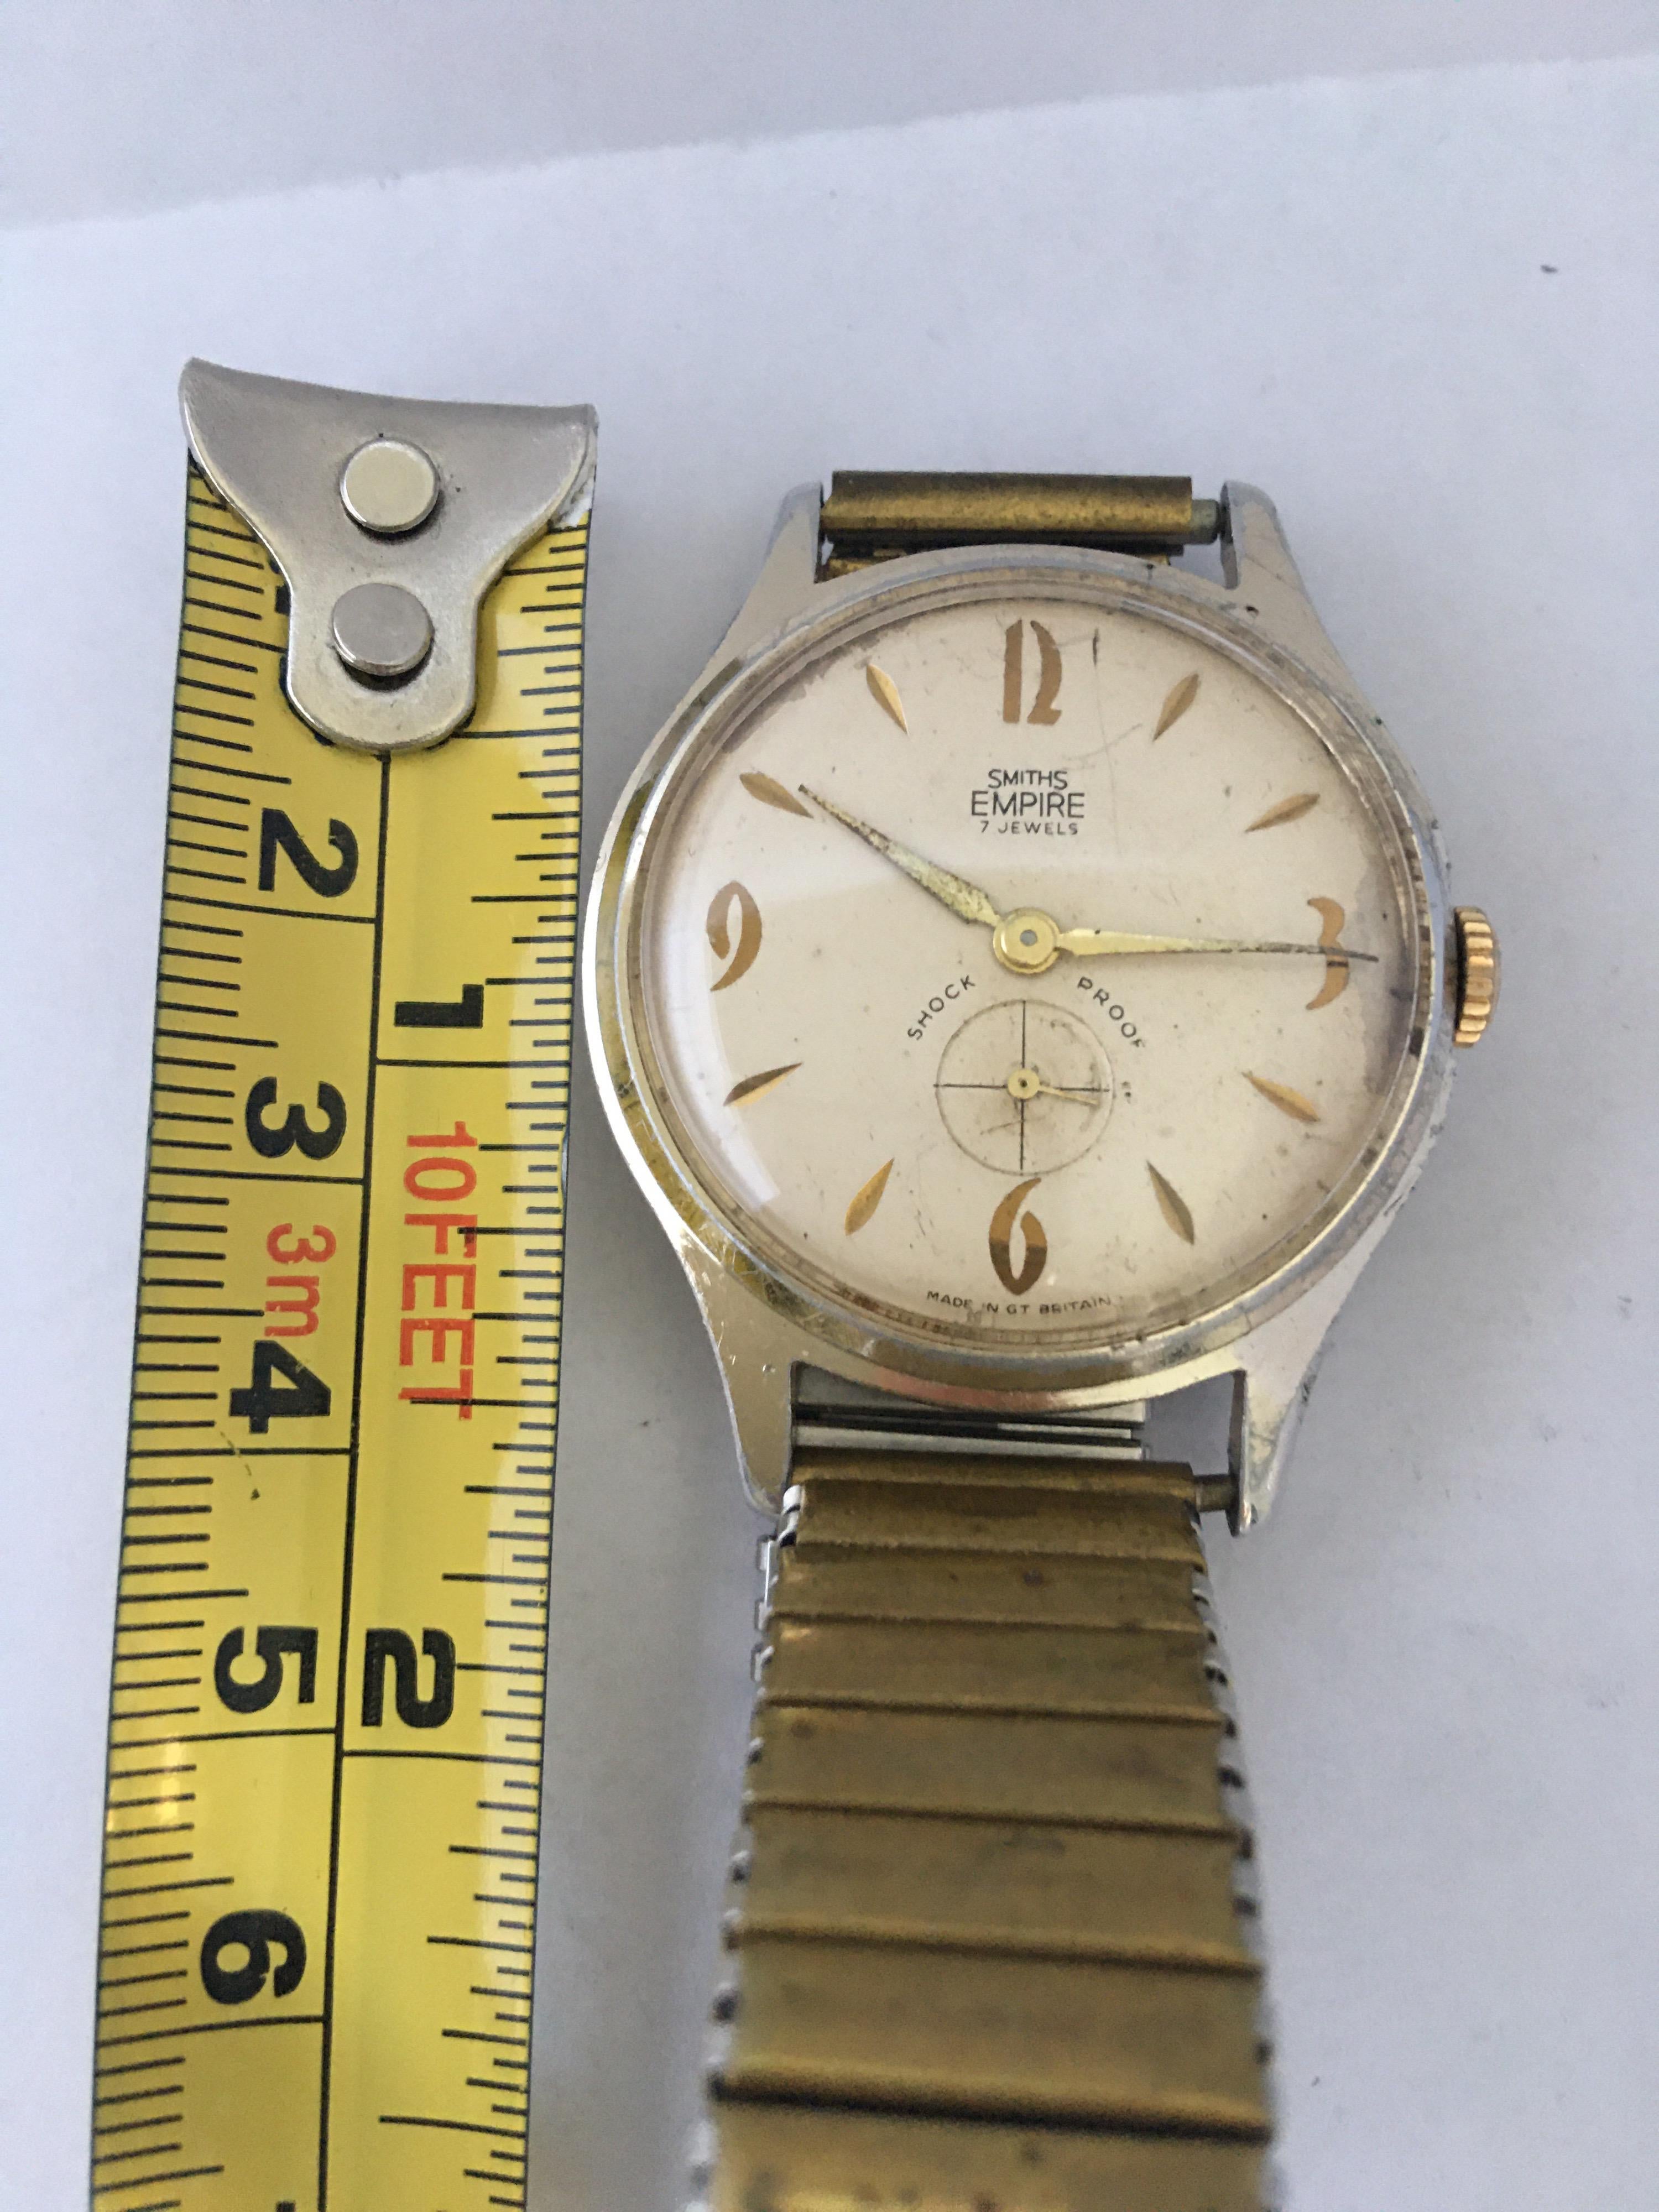 Vintage 1960s Smiths Empire Manual Winding Watch In Good Condition For Sale In Carlisle, GB